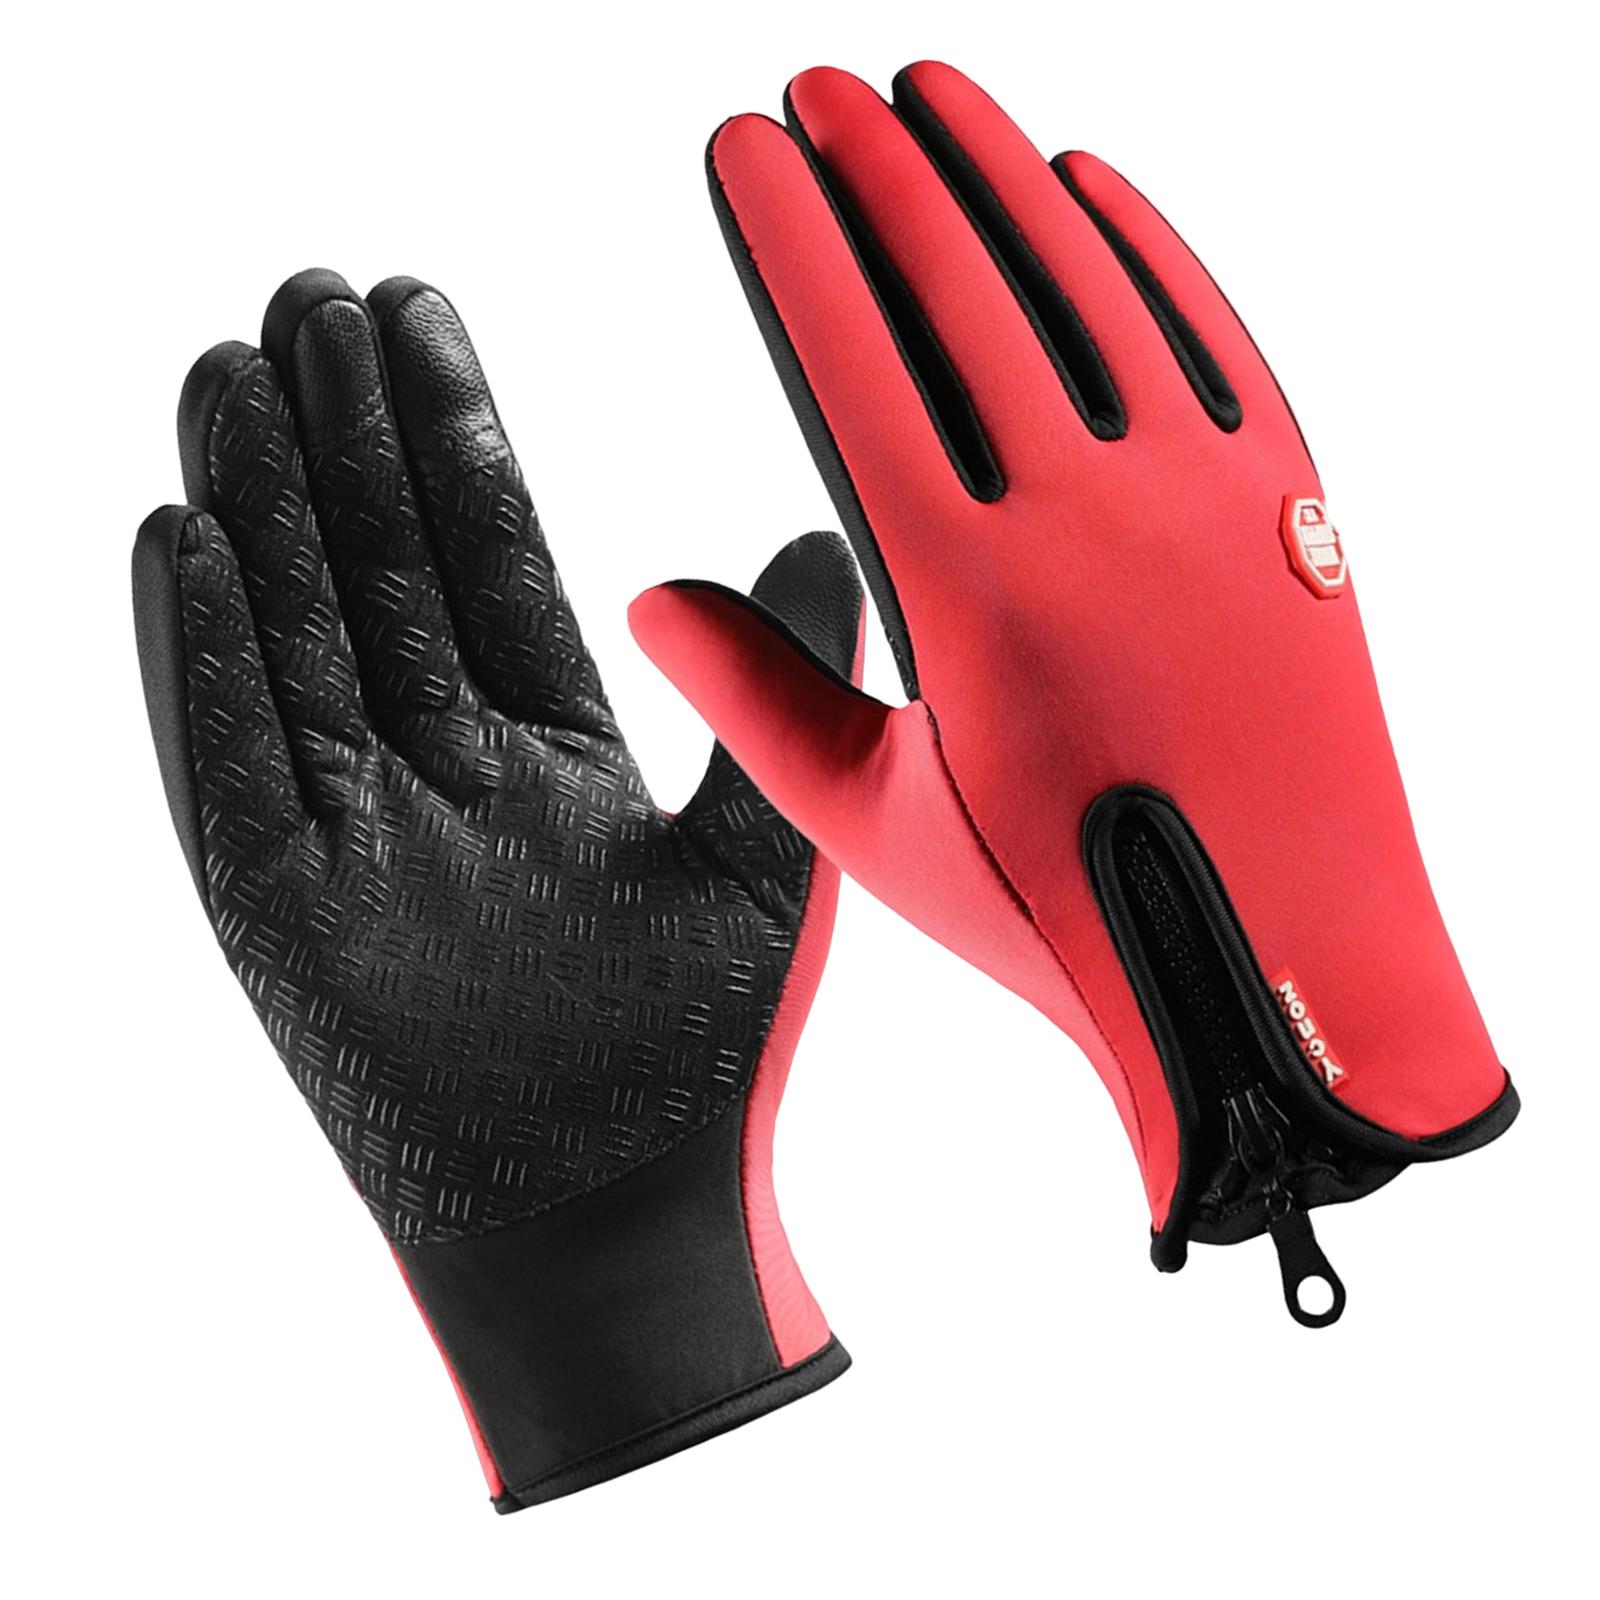 Winter Gloves Nonslip Thermal Gloves for Outdoor Running Sports Motorcycle XXL Red